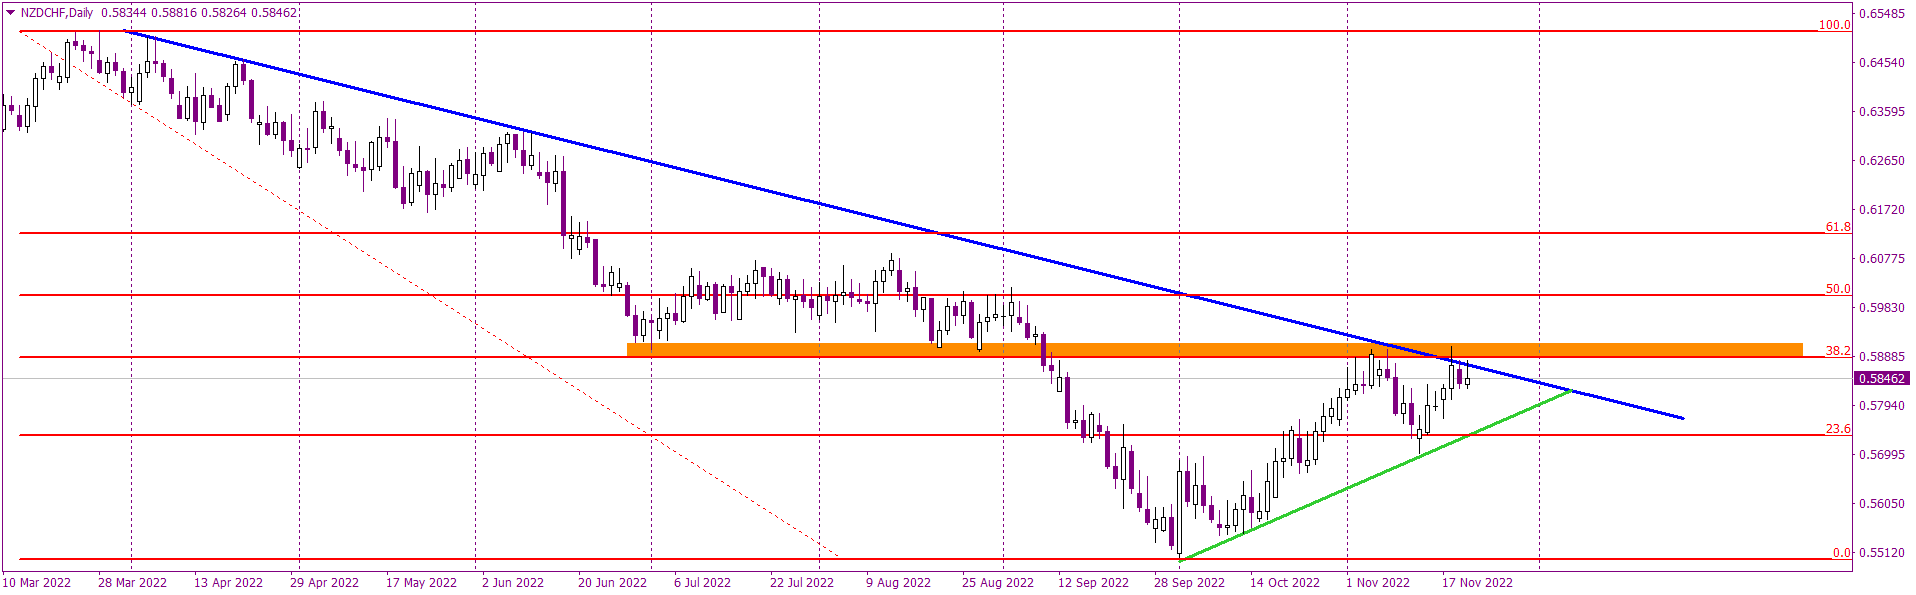 NZDCHF with a great bearish price action